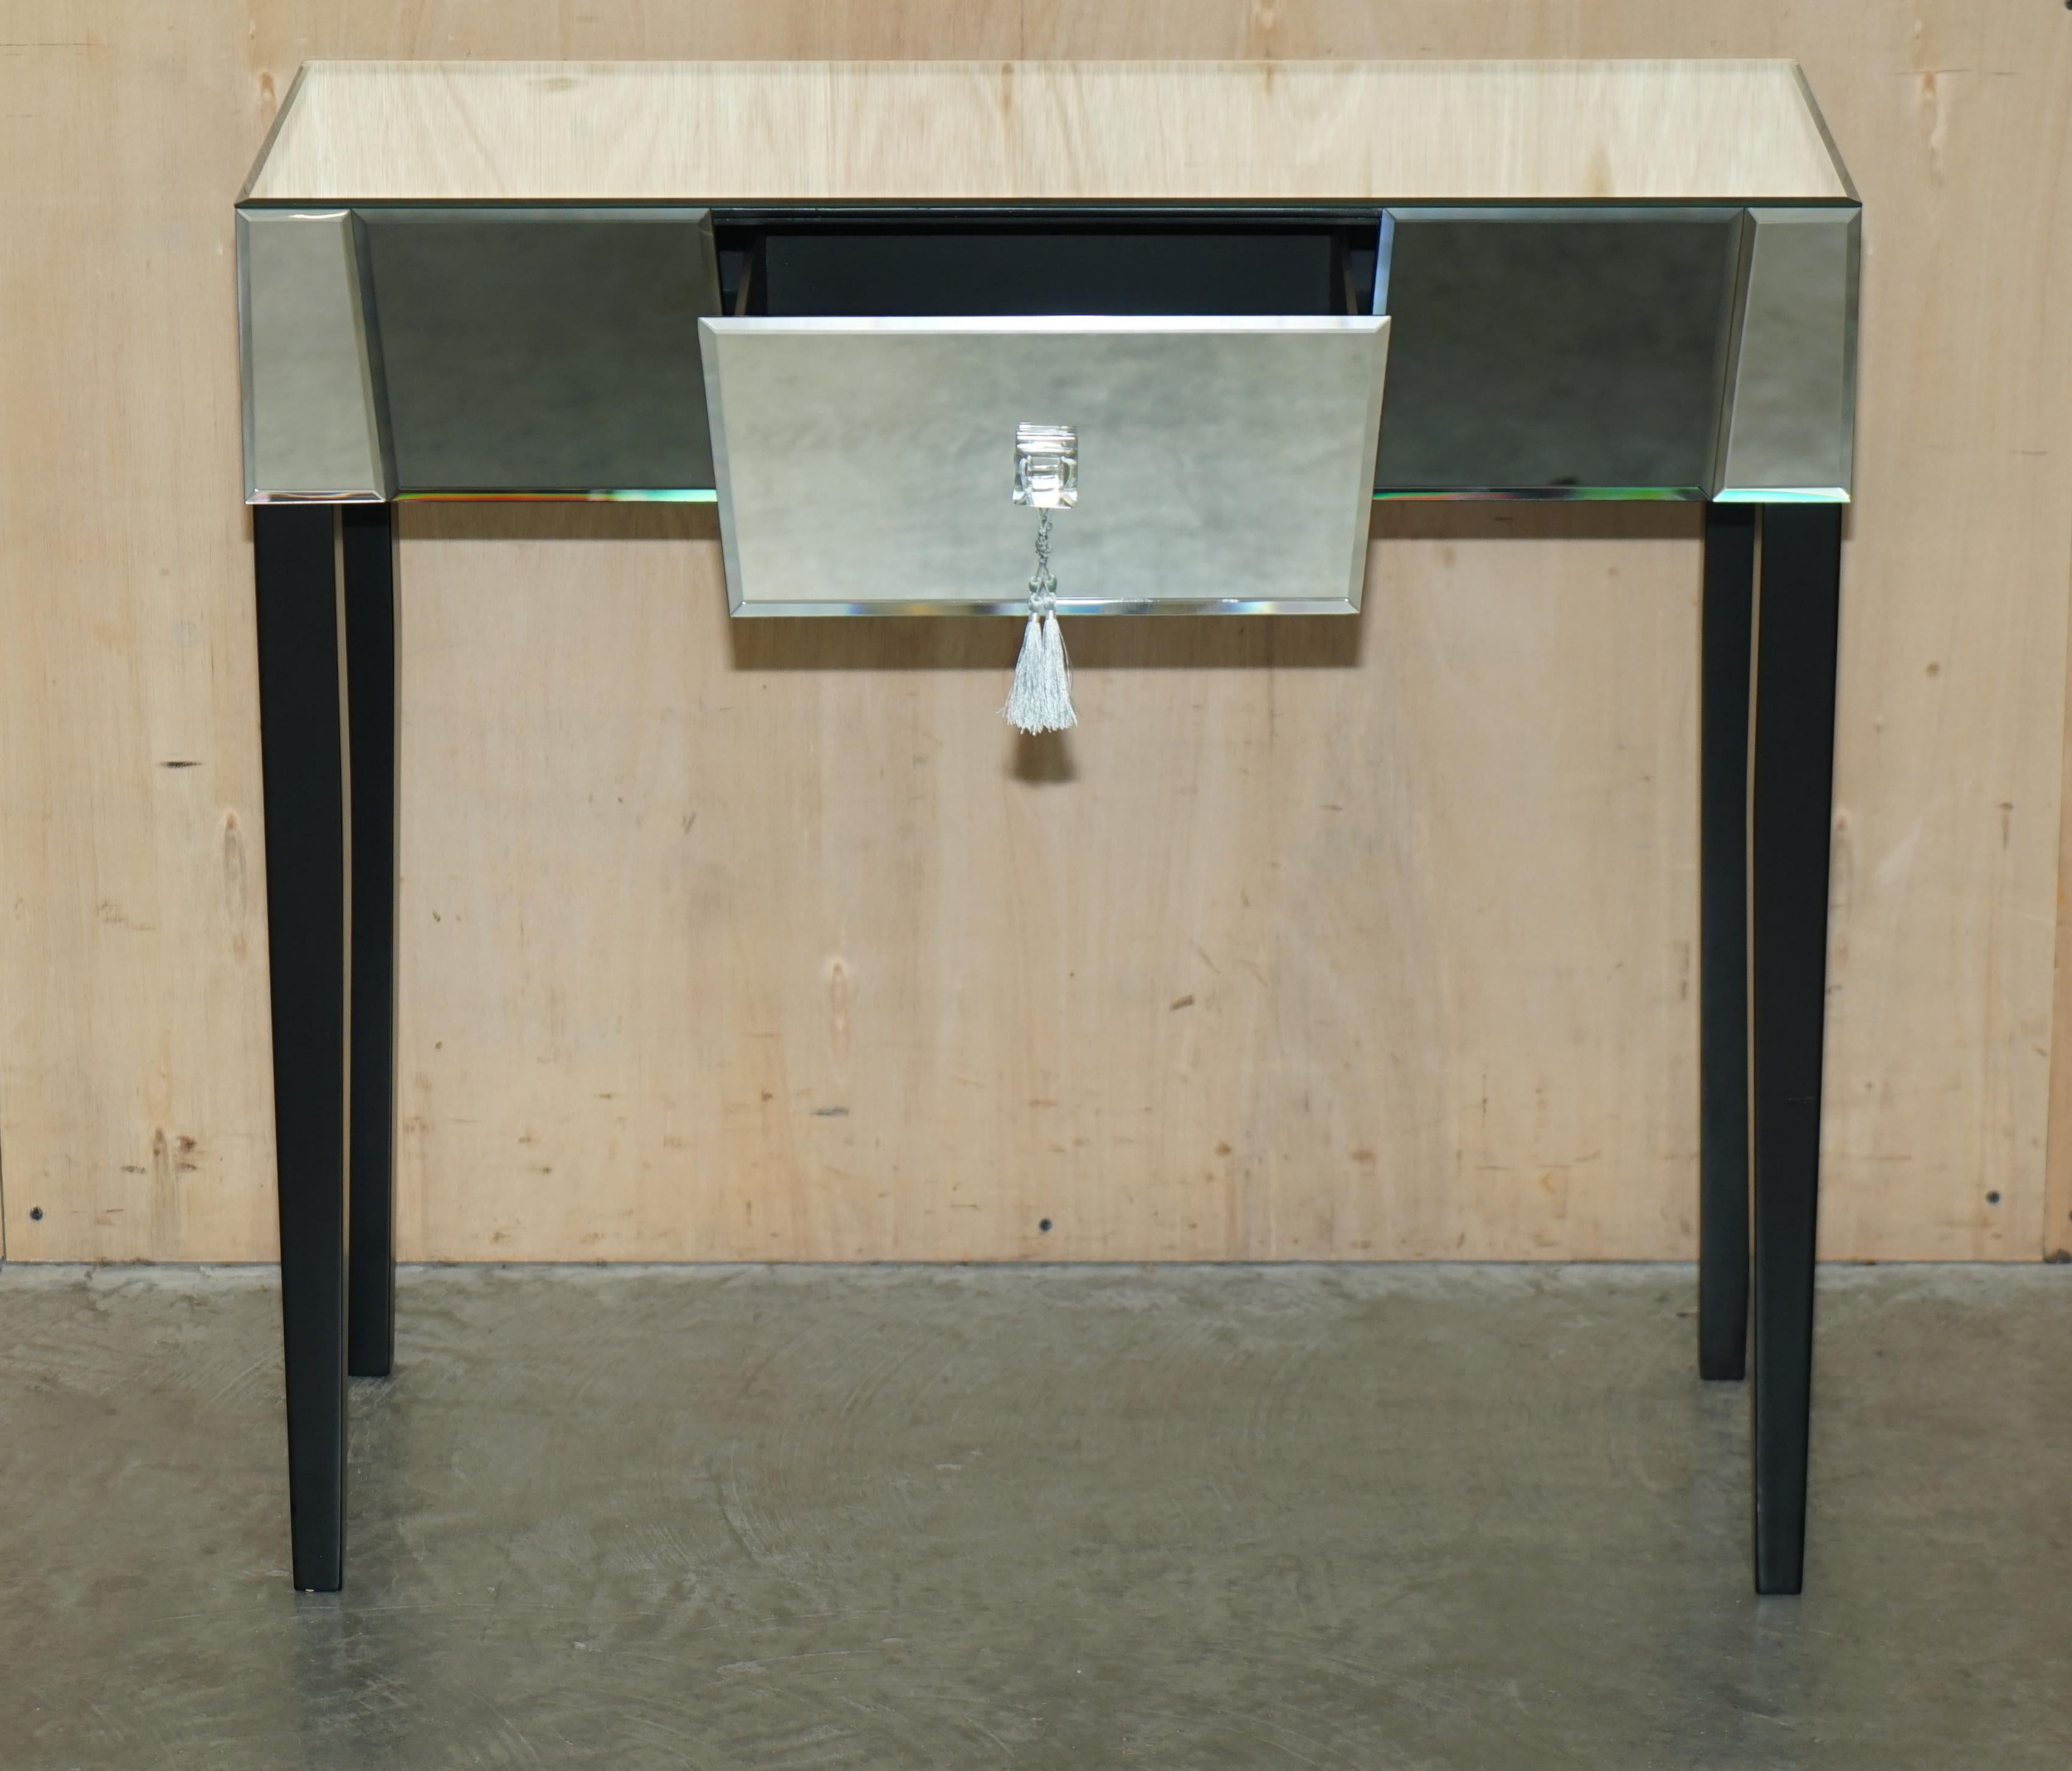 Decorative Art Deco Style Mirrored Dressing Table or Desk Which Is Part of Suite 10